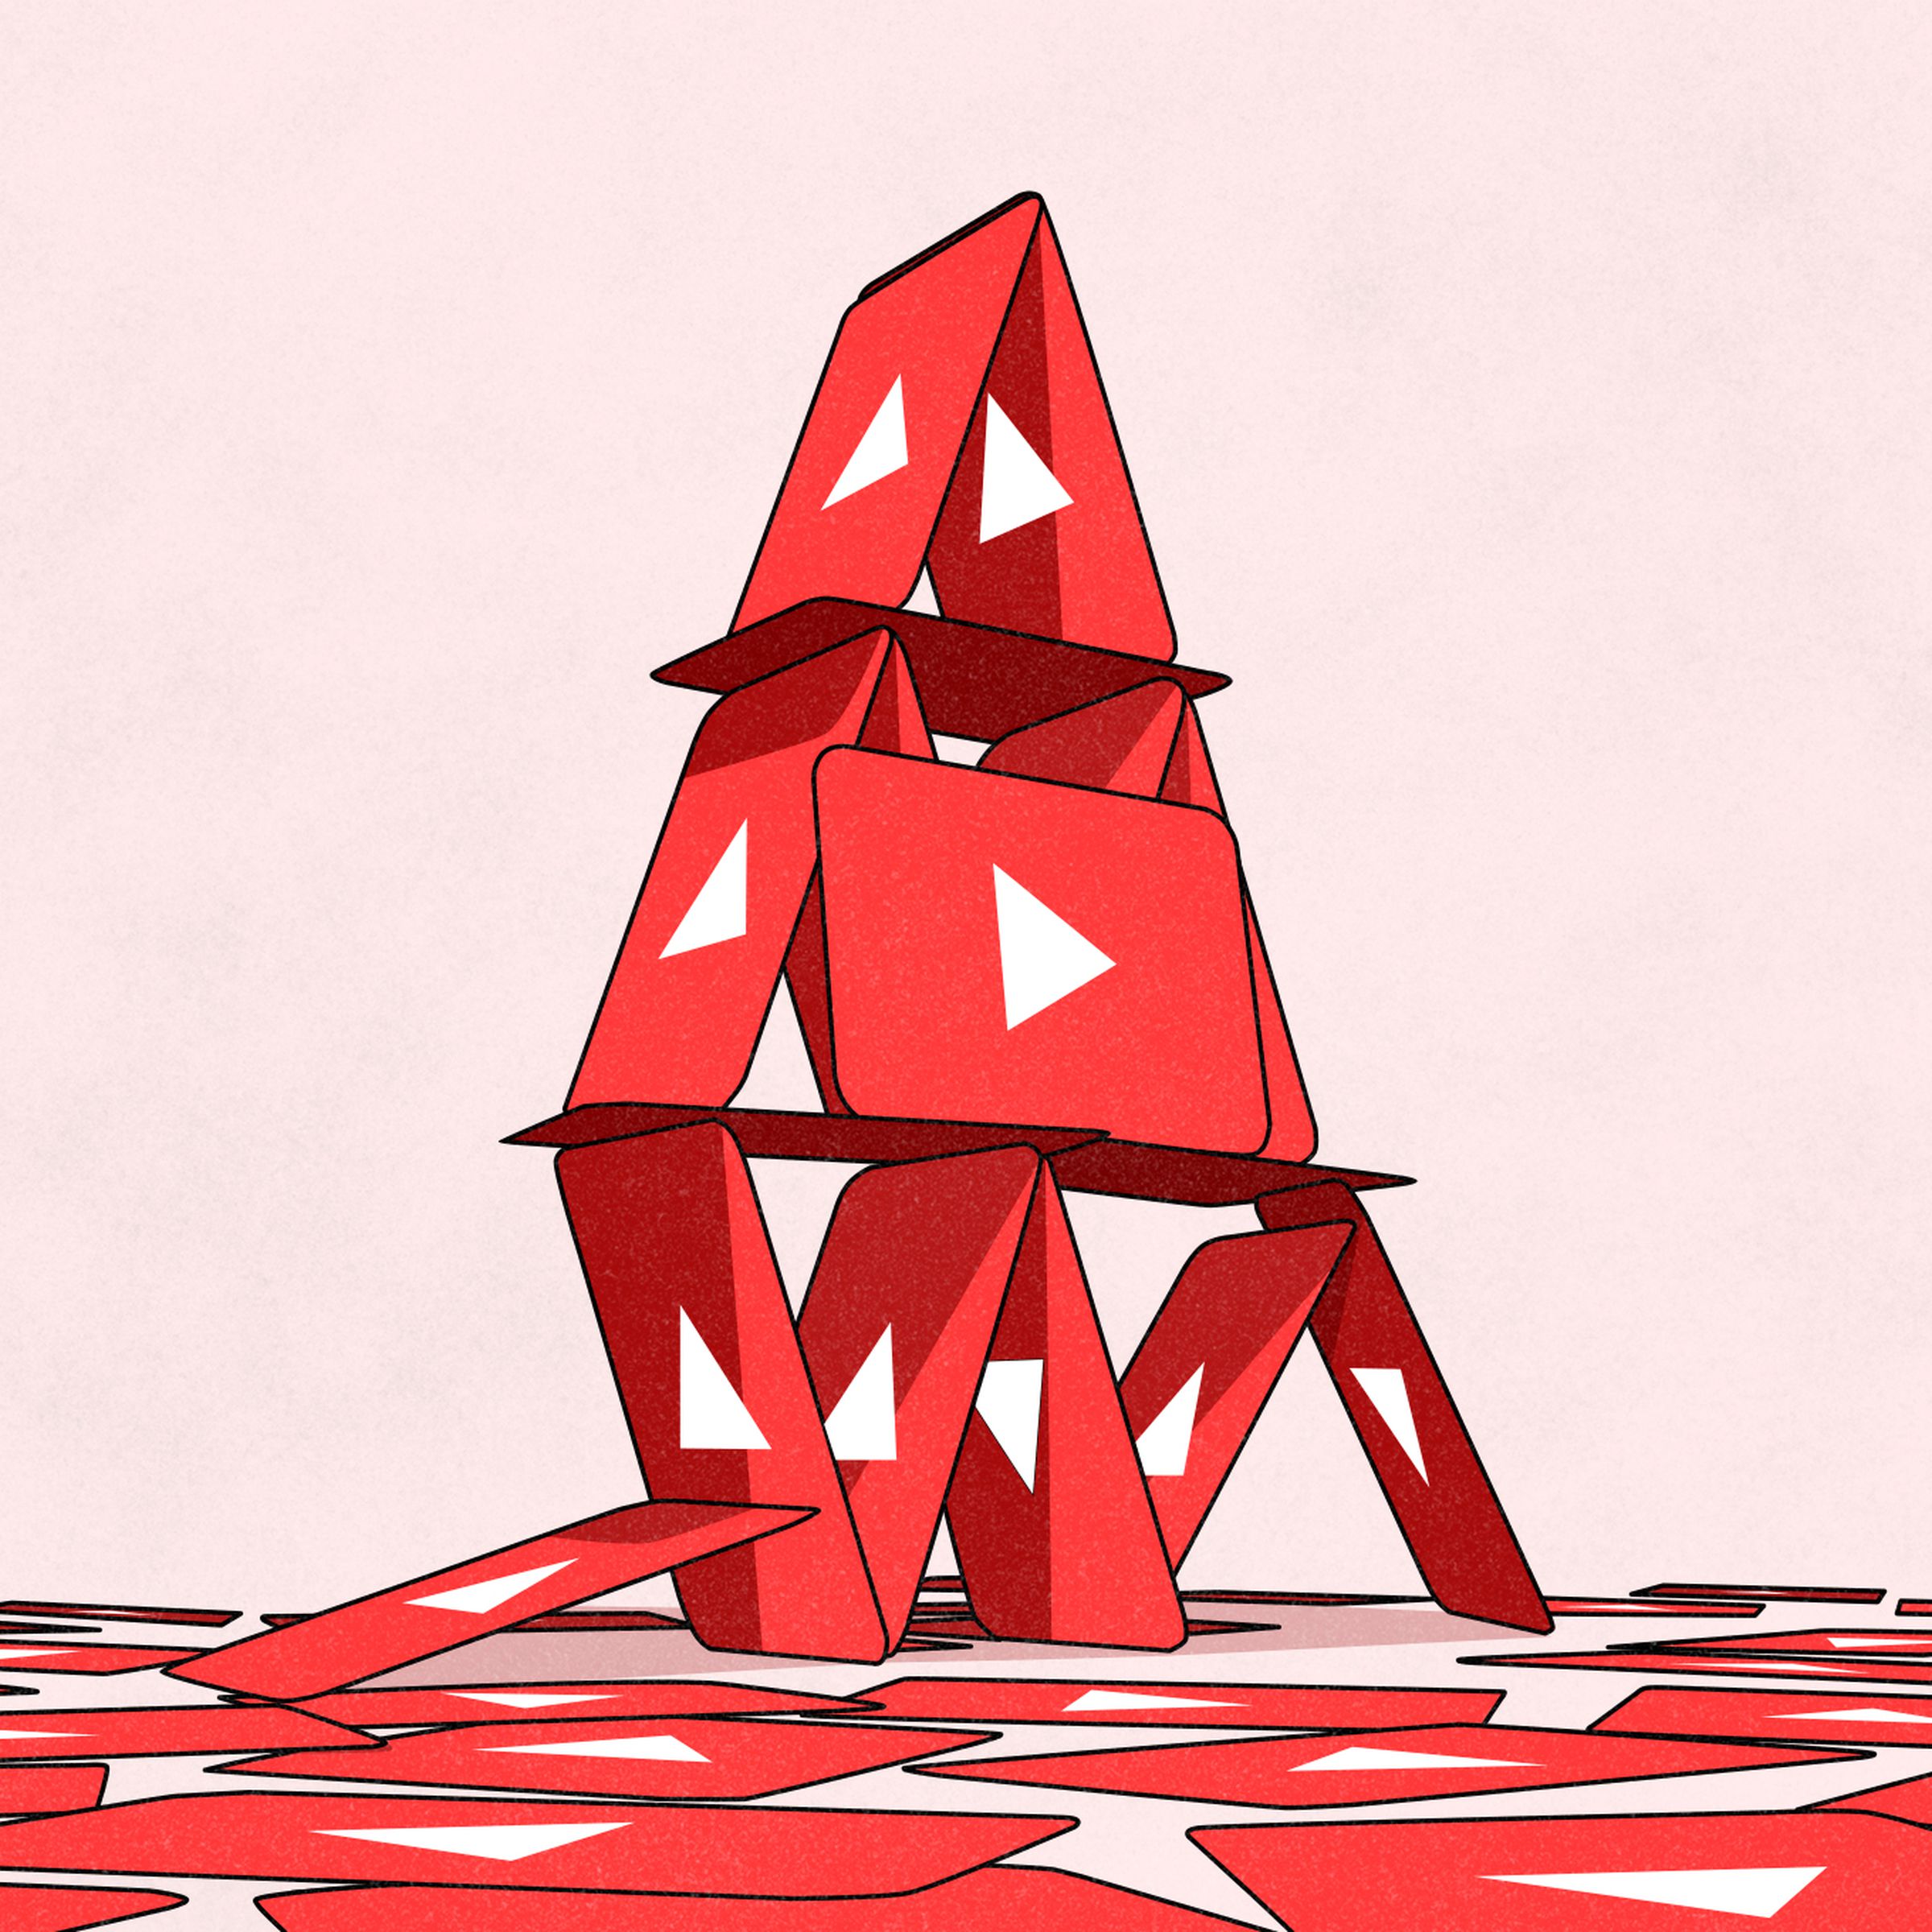 A YouTube House of Cards